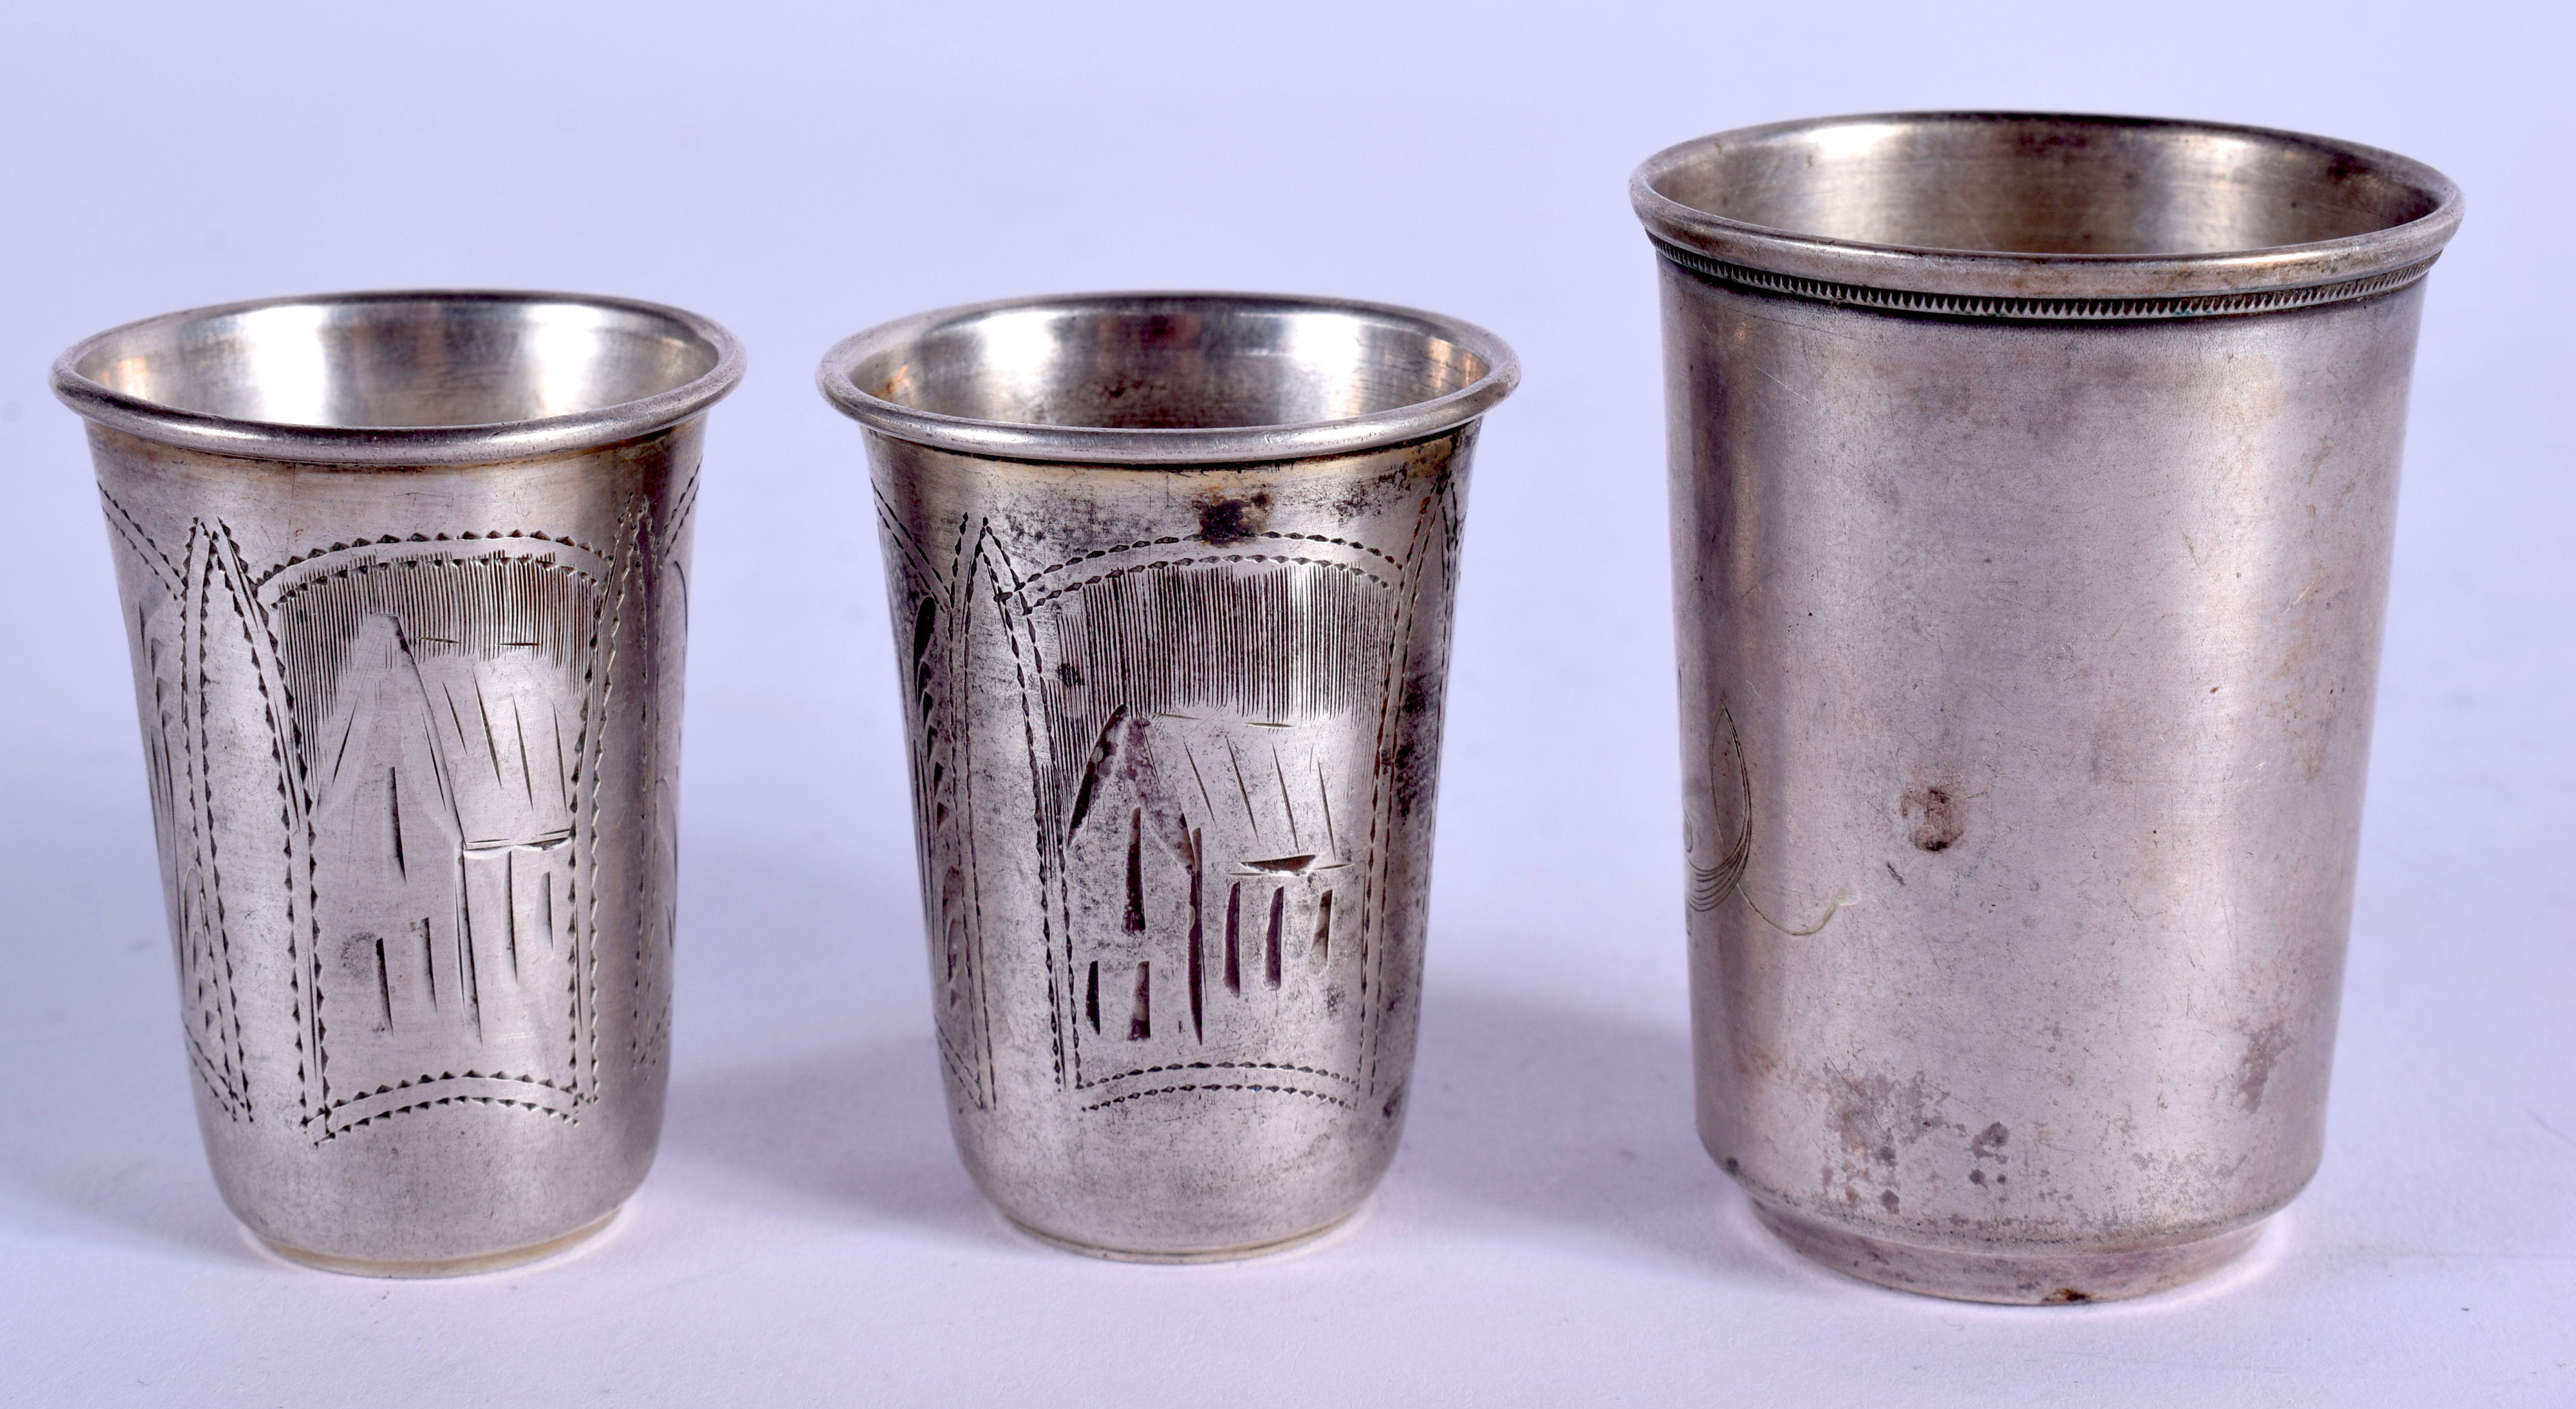 THREE ANTIQUE RUSSIAN SILVER BEAKERS. 1.7 oz. Largest 5 cm high. (3) - Image 2 of 6